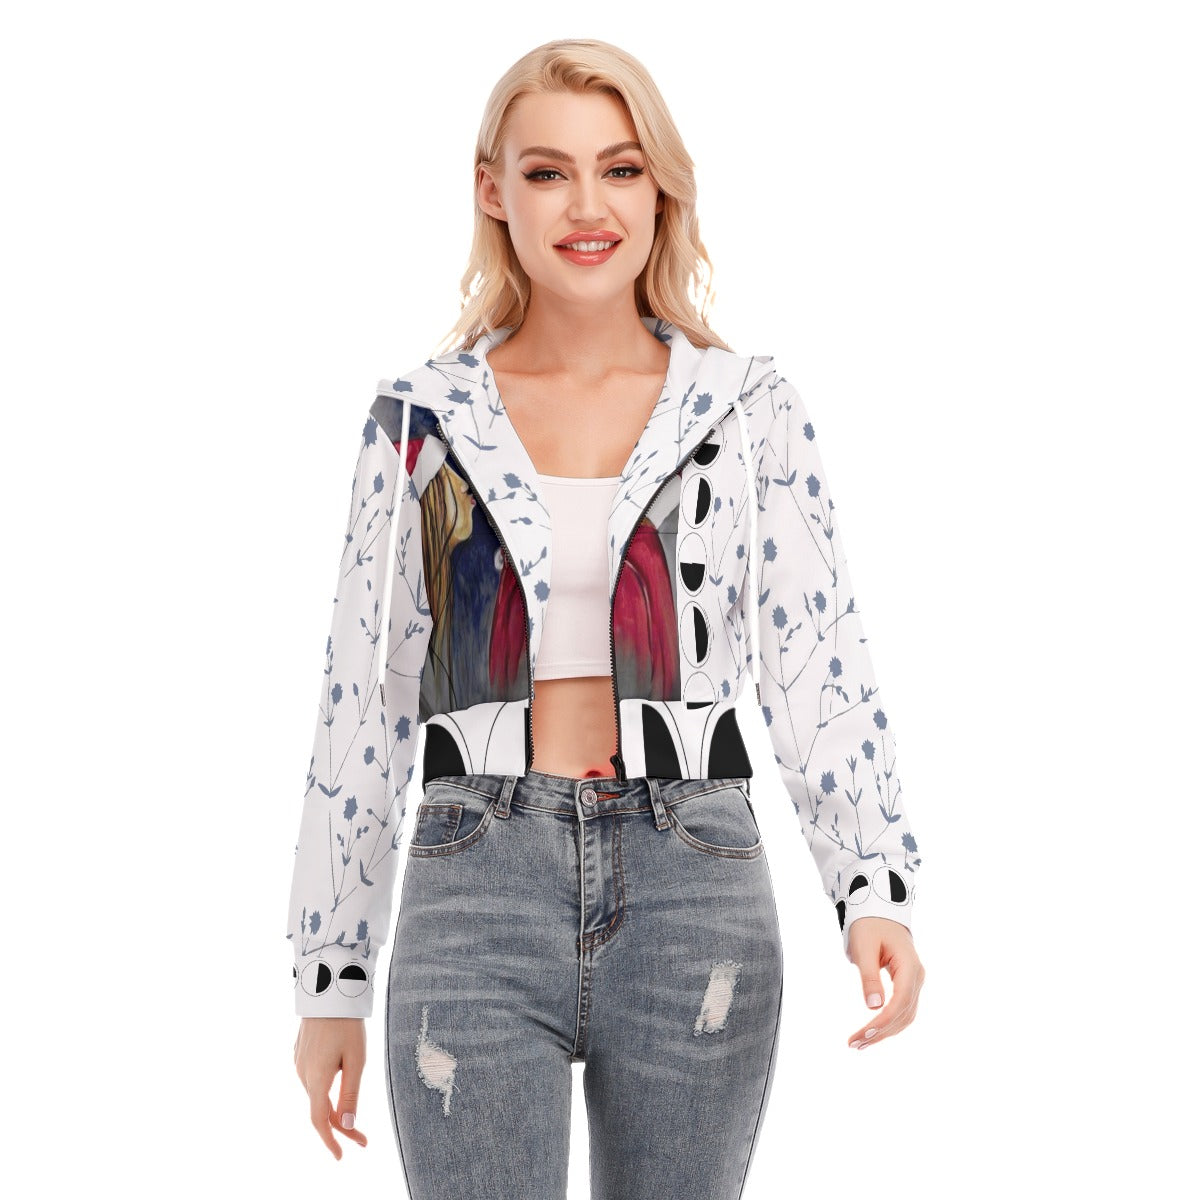 All-Over Print Women's Crop Top Hoodie With Zipper Closure Winter Collection 2023 by CRW